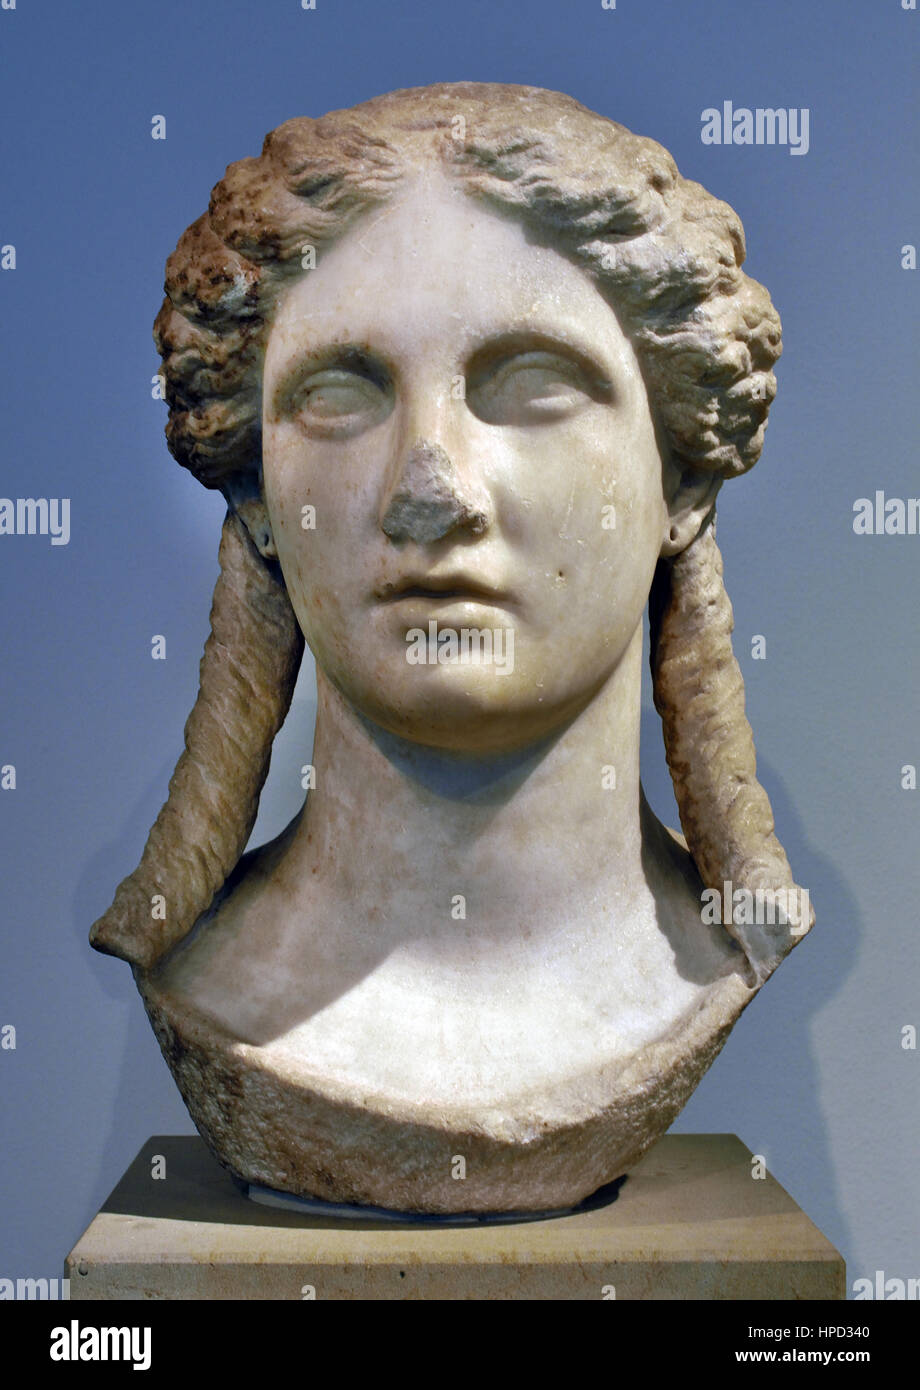 Apollo or Artemis? This head, acquired in Athens in 1844, was for many years described merely as 'a female head'. Parian marble. Height 56 cm. Hellenistic, 330-300 BC. Stock Photo